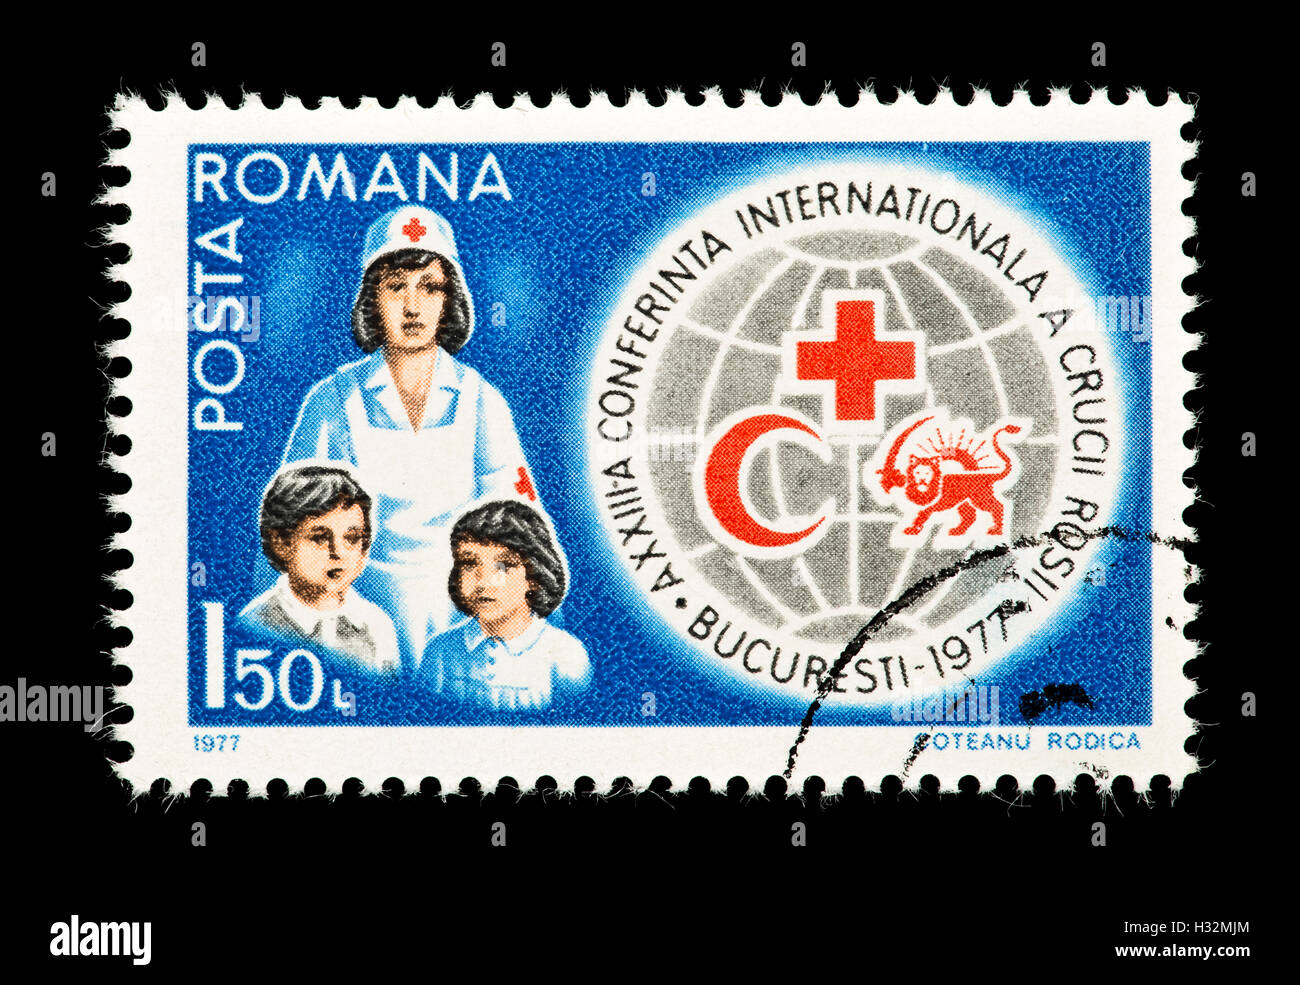 Postage stamp from Romania depicting a nurse and various Red Cross symbols,children (23rd Intl Red Cross conference, Bucharest). Stock Photo